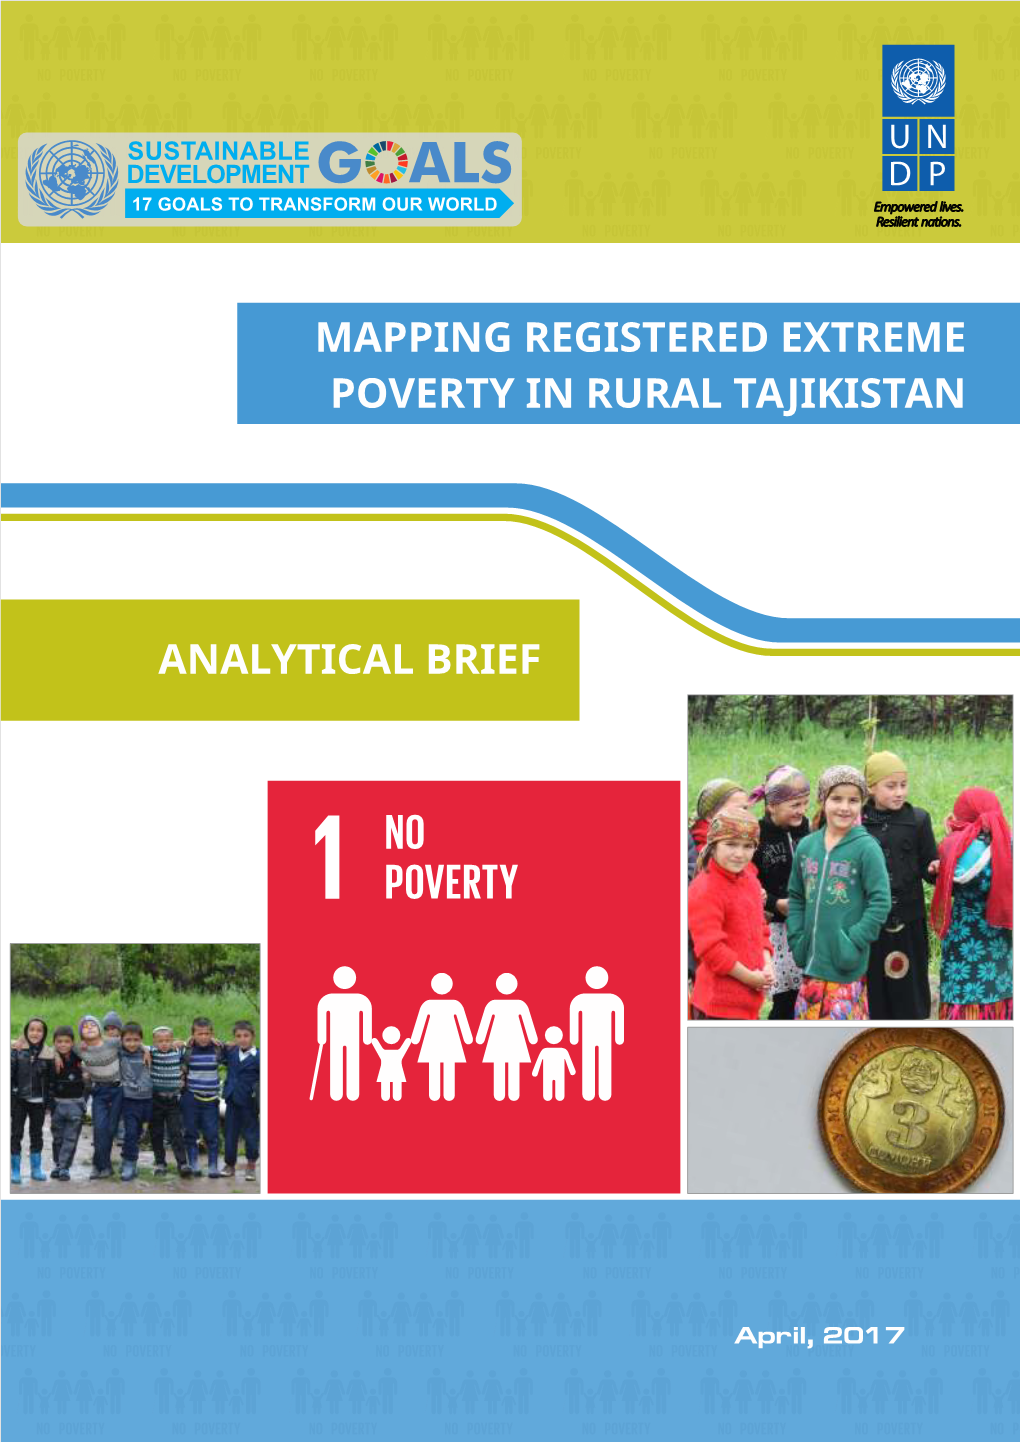 Mapping Registered Extreme Poverty in Rural Tajikistan